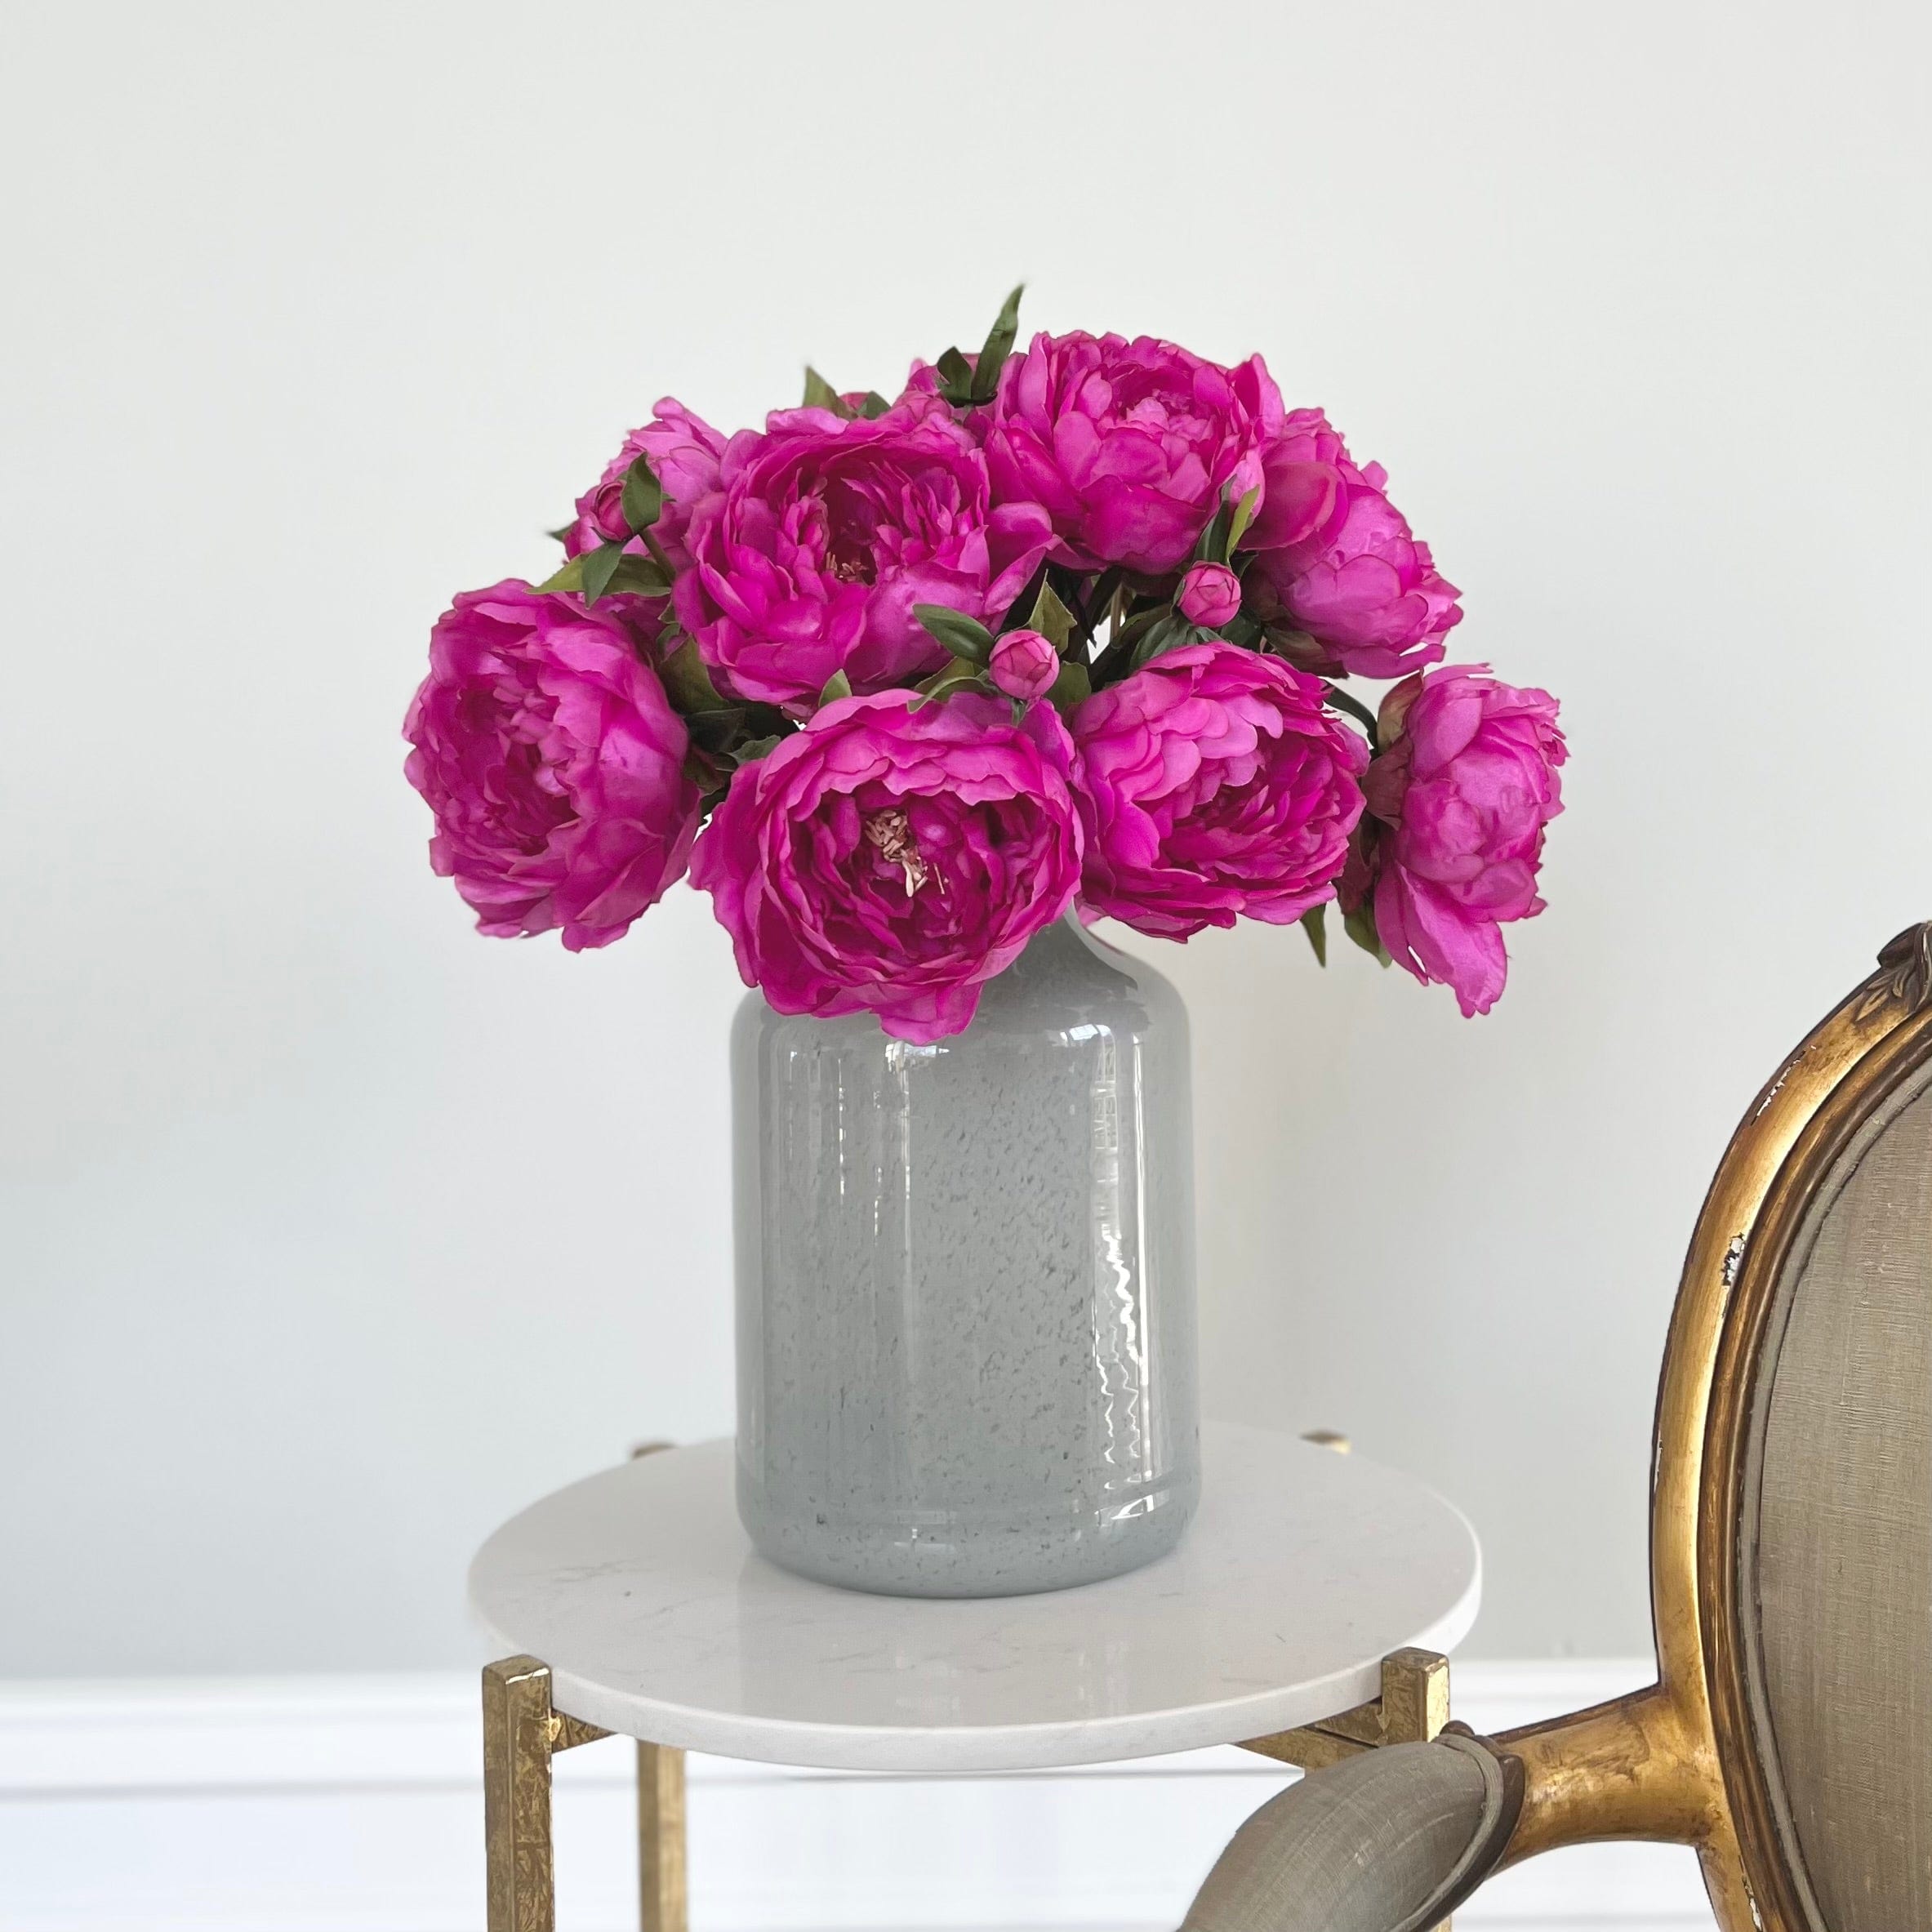 Luxury Lifelike Realistic Artificial Fabric Silk Blooms with Foliage Buy Online from The Faux Flower Company | 12 stems of Fuchsia Classic Peony ABY6043FU styled in Grey Glass Large Funnel Neck Vase ABV0144